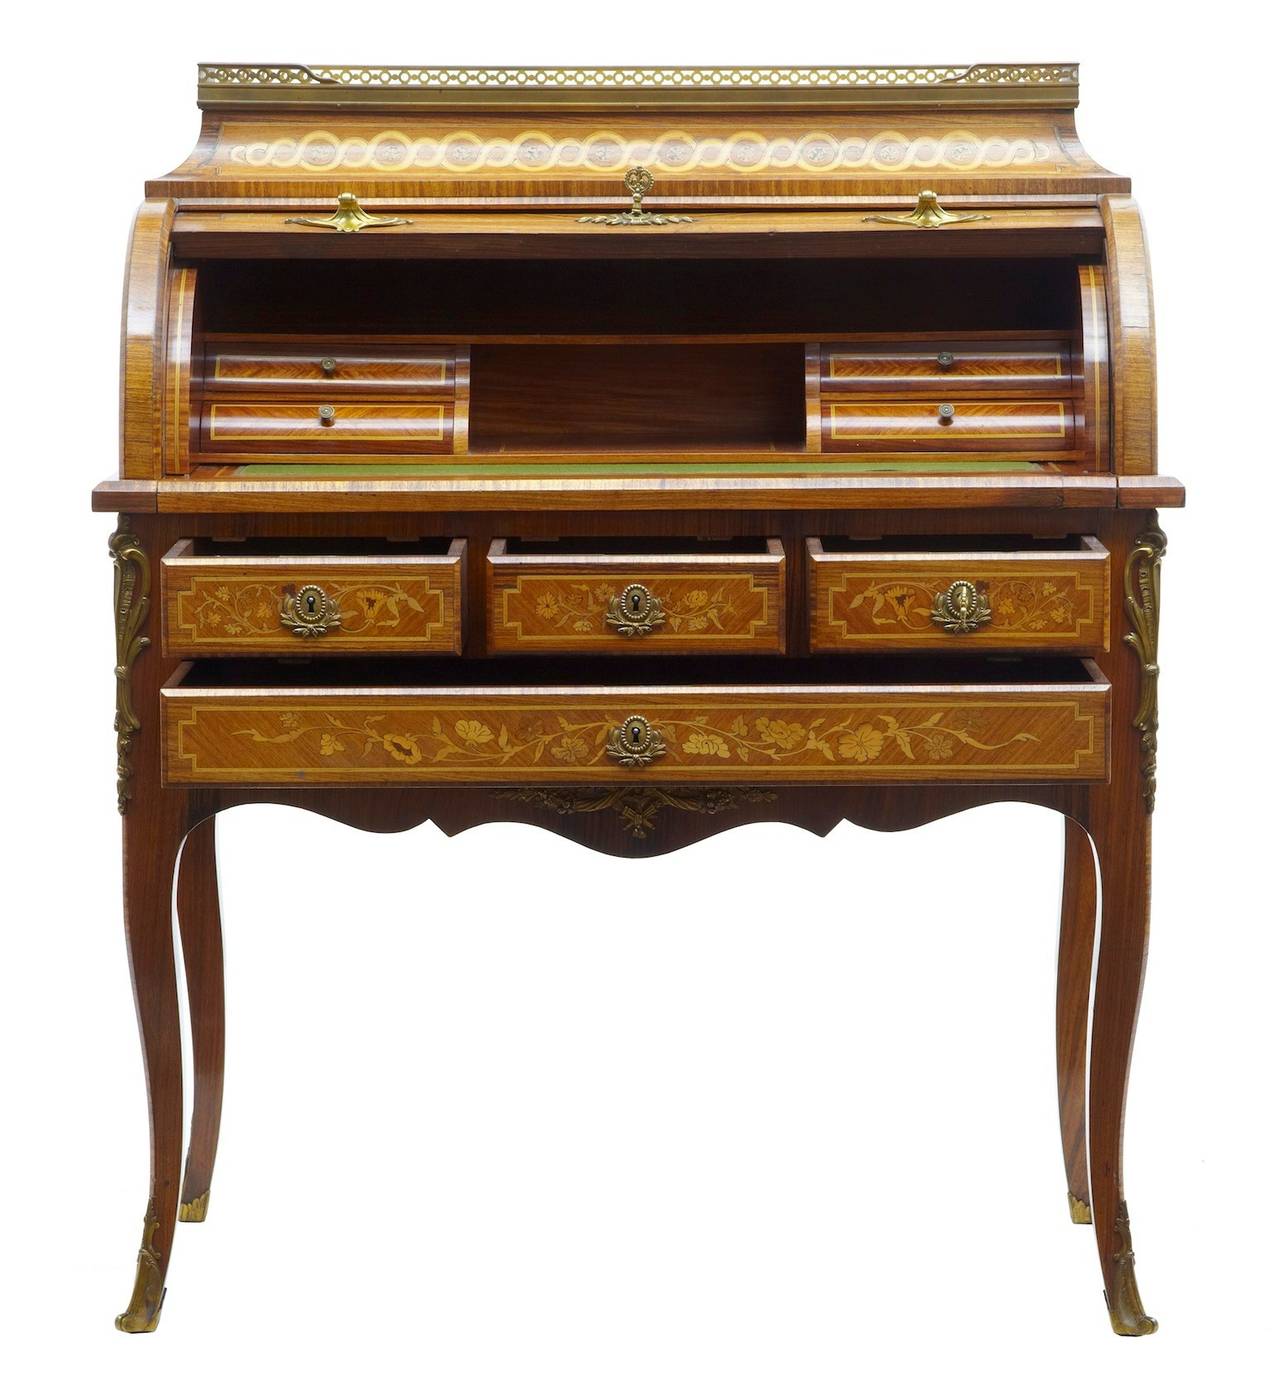 Fine quality ladies cylinder desk stamped and by S&H jewells of Holborn, circa 1870. 

Superb standard of marquetry by one of London's top makers in the 19th century. 

Inlaid with satinwood, kingwood, rosewood and boxwood. 

Profusely inlaid